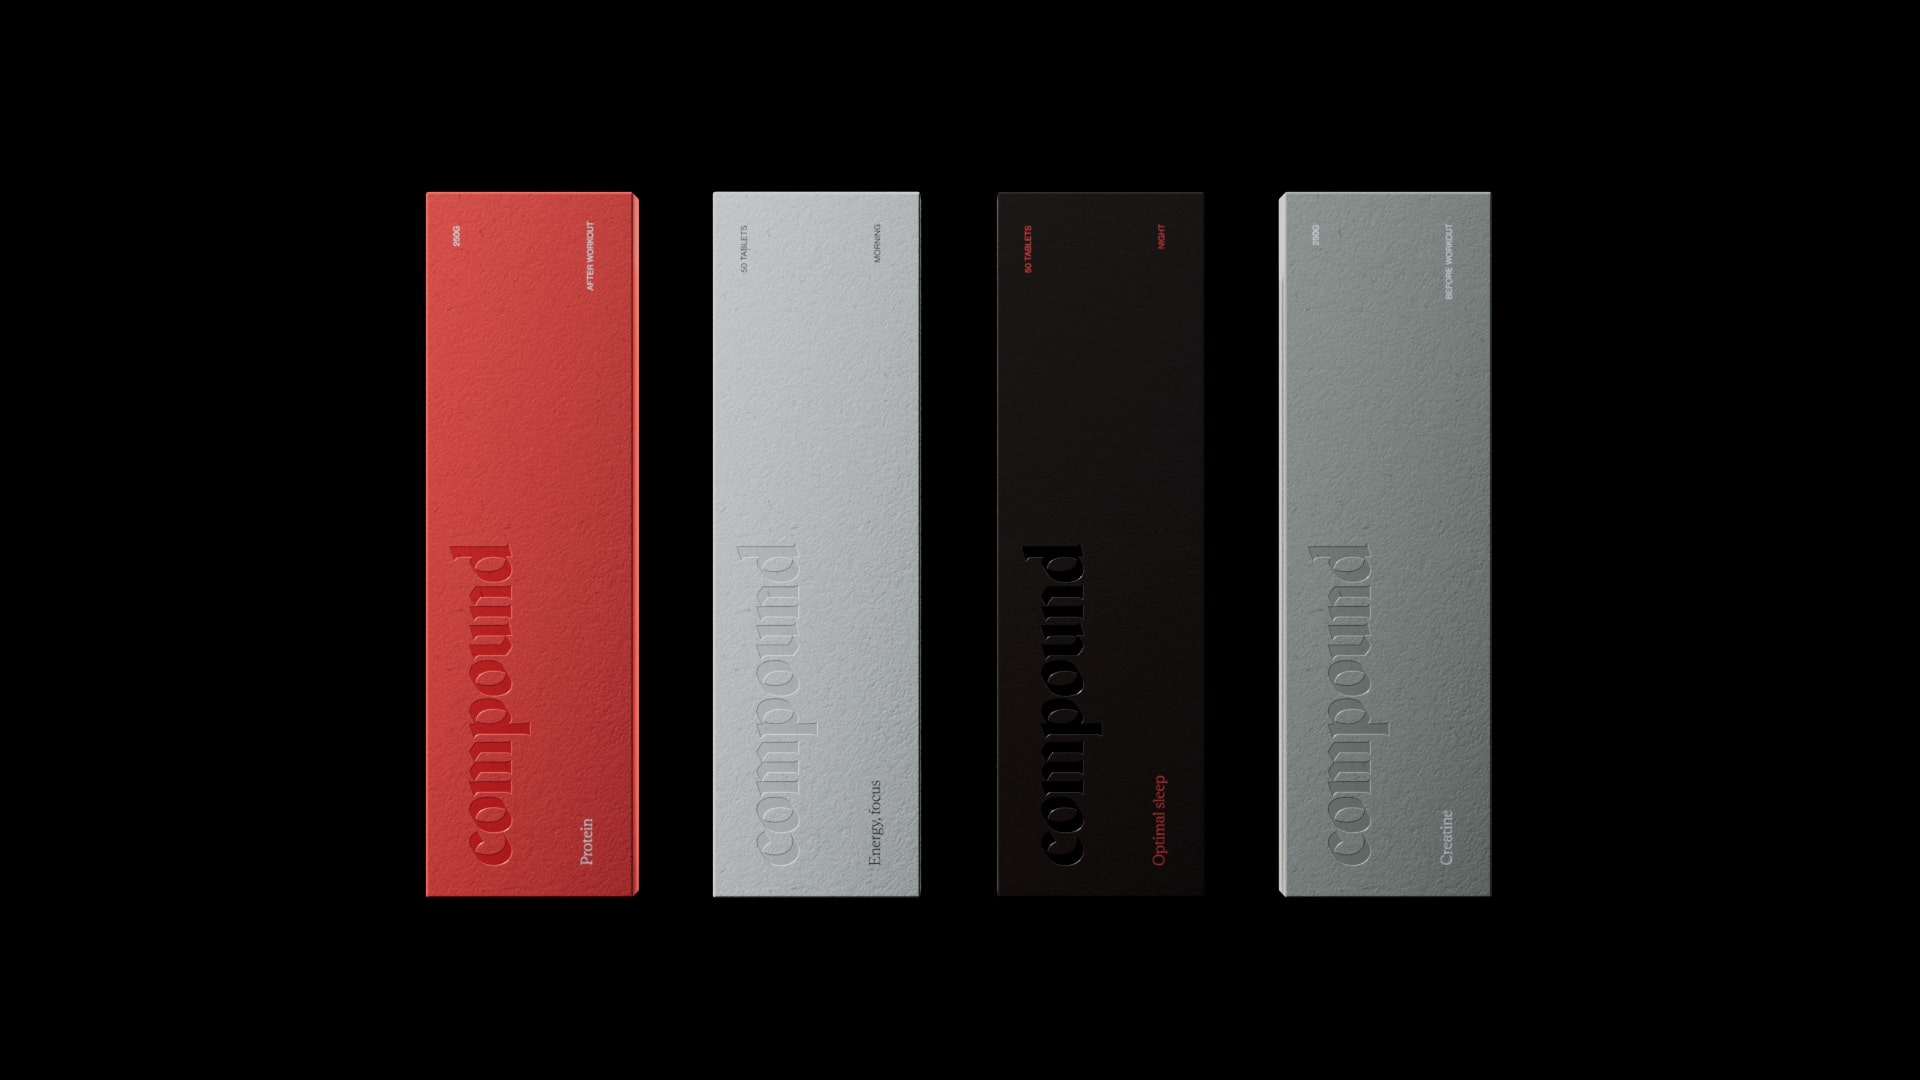 Four rectangular colored cards are displayed vertically on a black background. From left to right, the colors are red, light gray, black, and dark gray. Each card features the word "compound" embossed in lowercase letters, running down the length of the card.